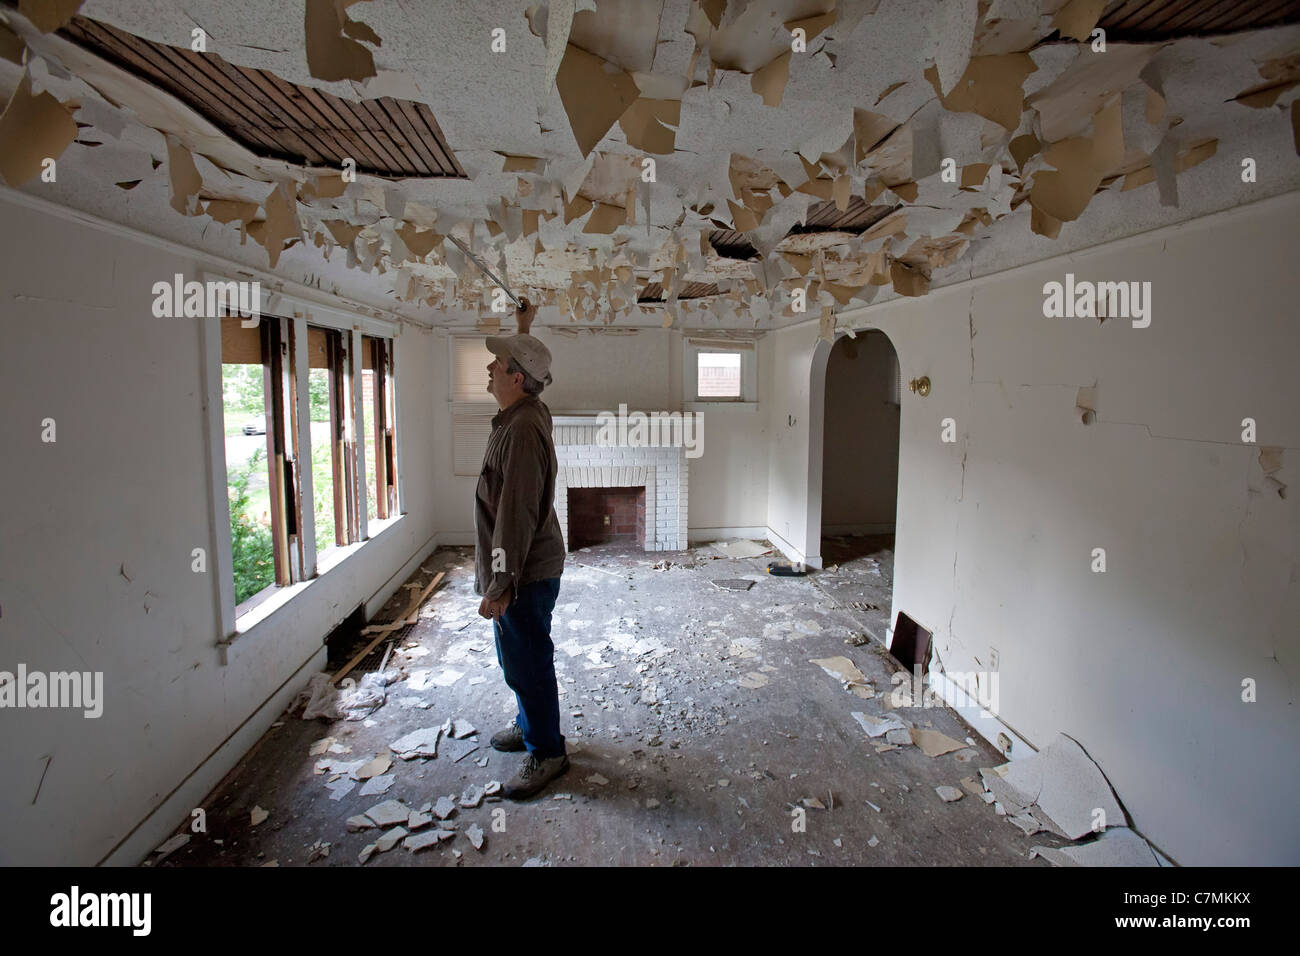 Detroit, Michigan - The living room of a house that has been vacant and abandoned for years. Stock Photo